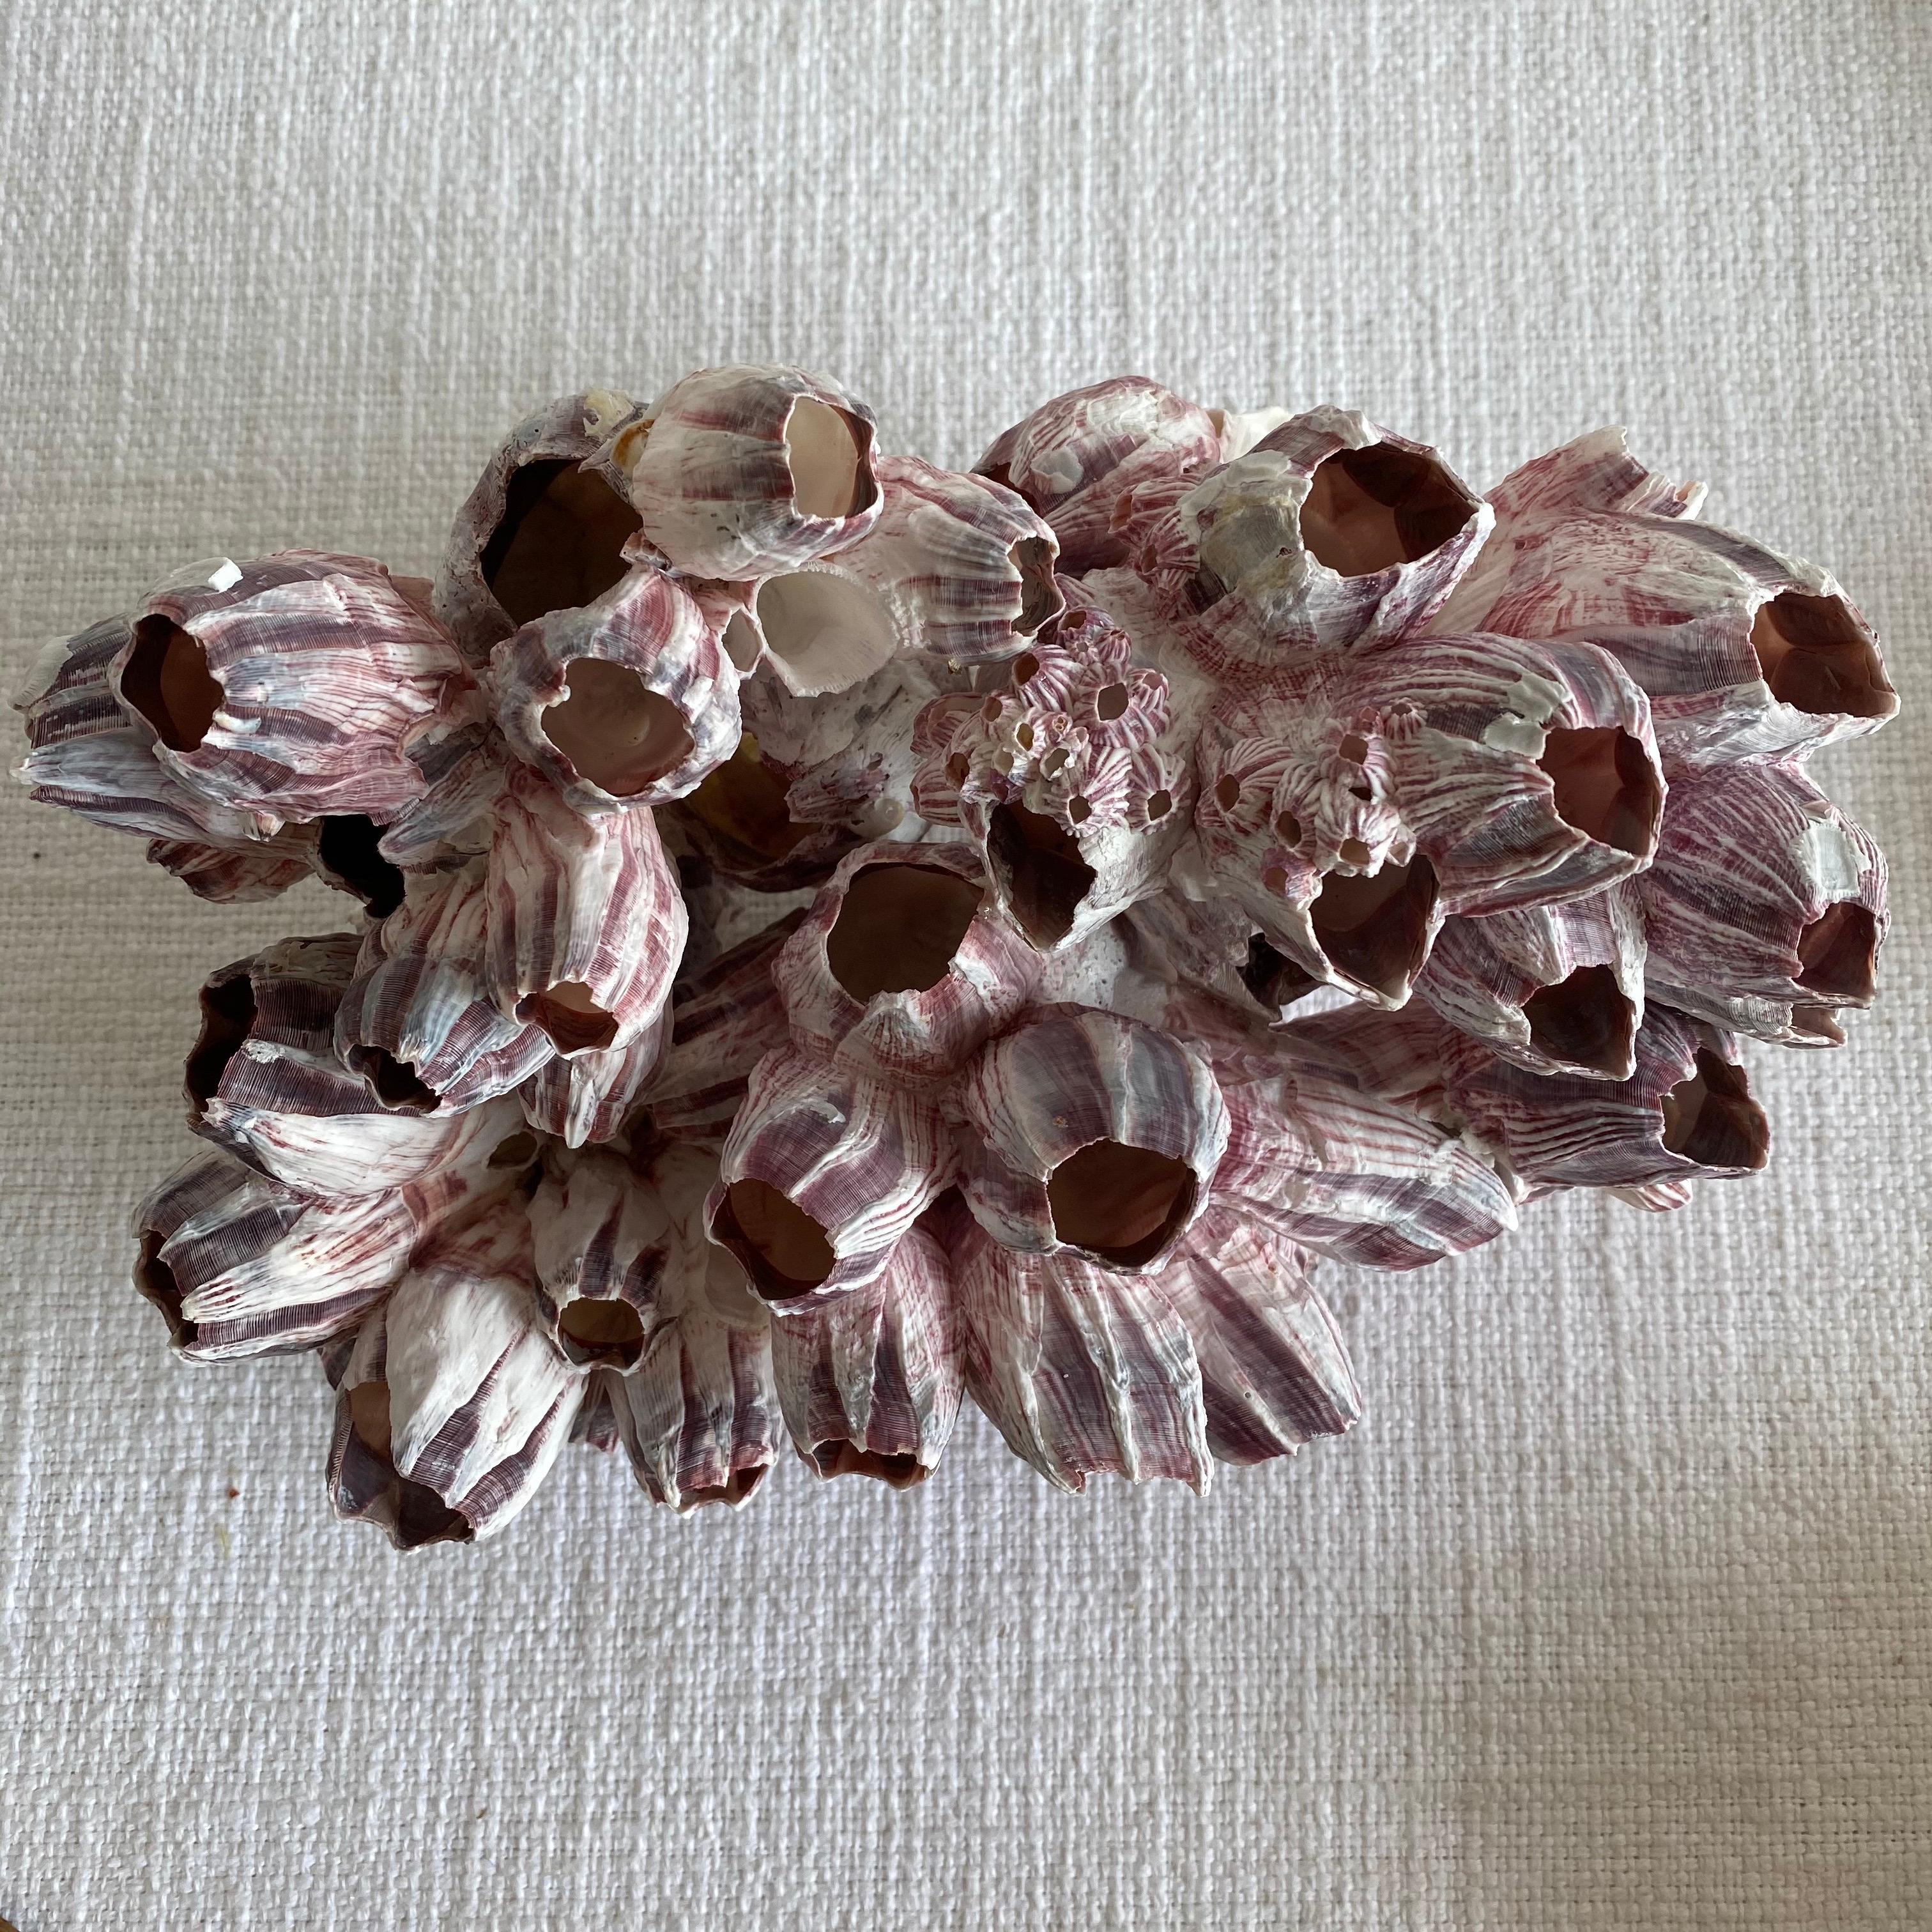 Real barnacle coral
Pink, purple and white tones
Size 10.5” x 7.5” x 6.5”.